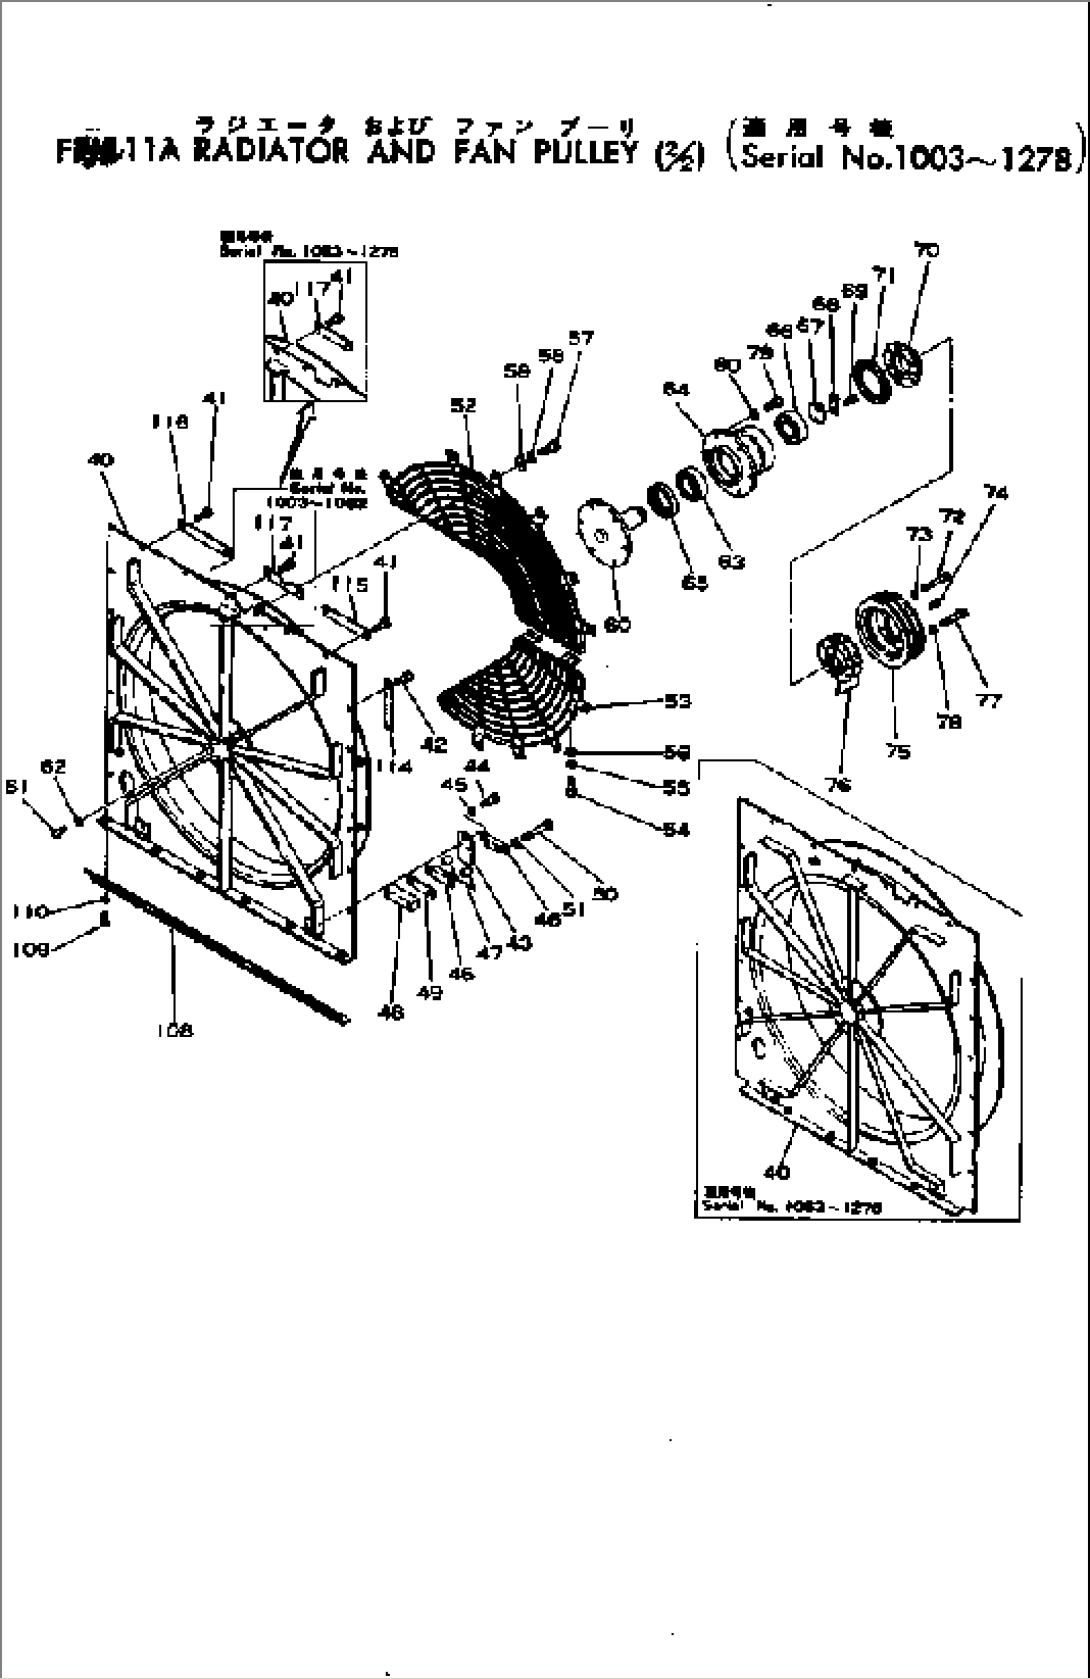 RADIATOR AND FAN PULLEY (2/2)(#1003-1278)